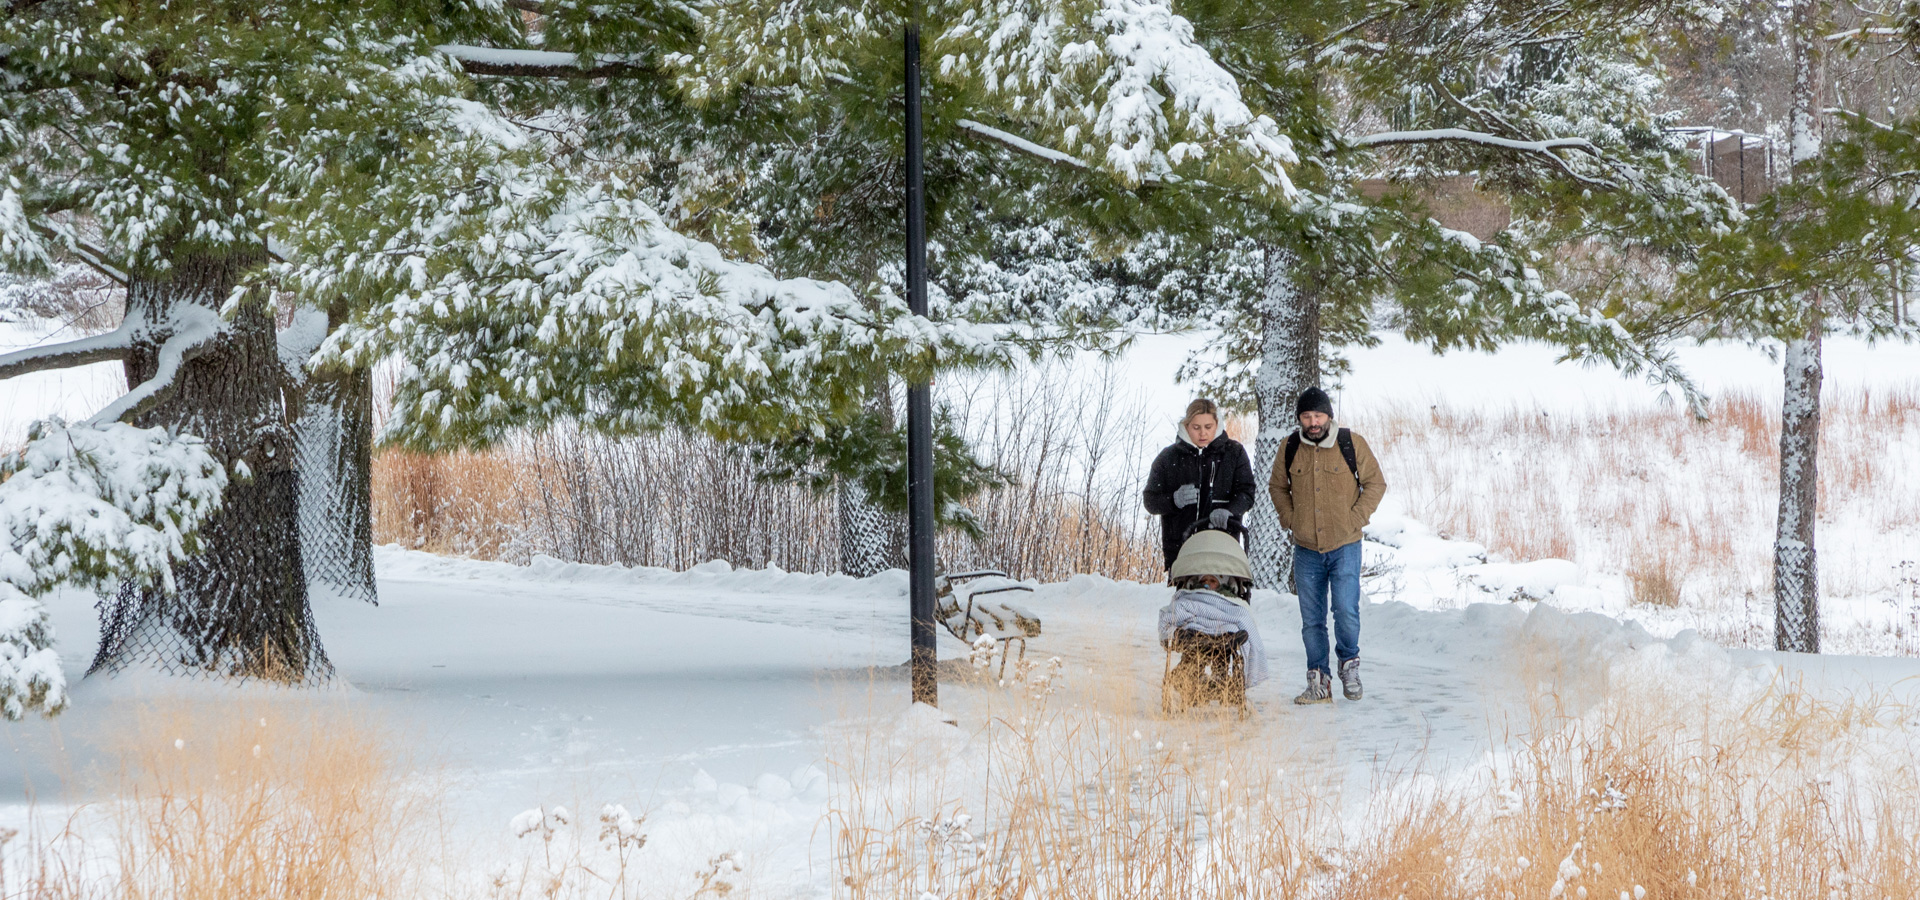 Couple walks around Meadow Lake with a stroller in winter